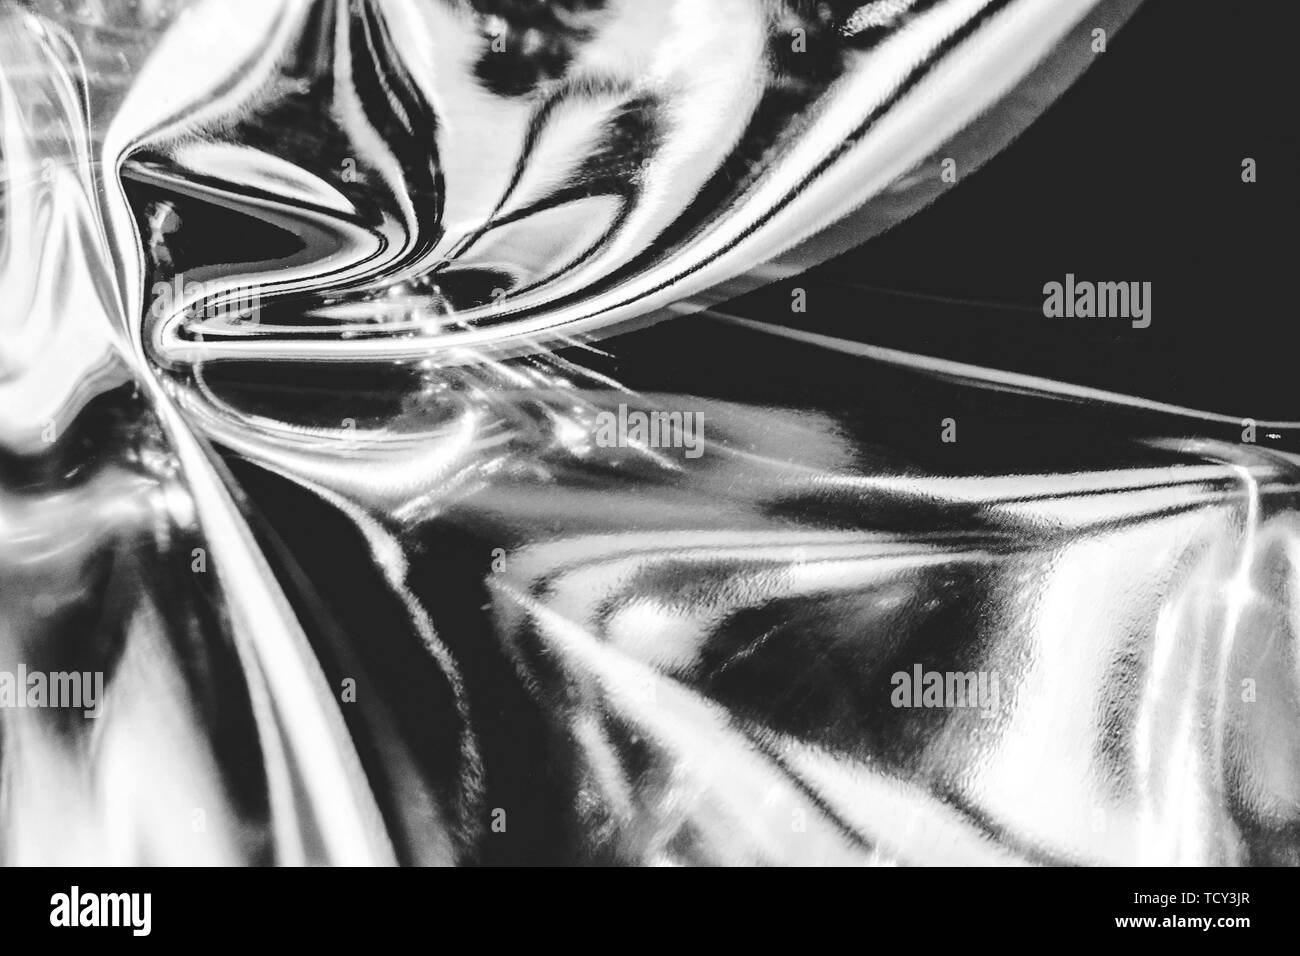 Abstract black and white watercolor or acrylic paint background. Black and white  paint splash texture can be used for any design Stock Photo - Alamy